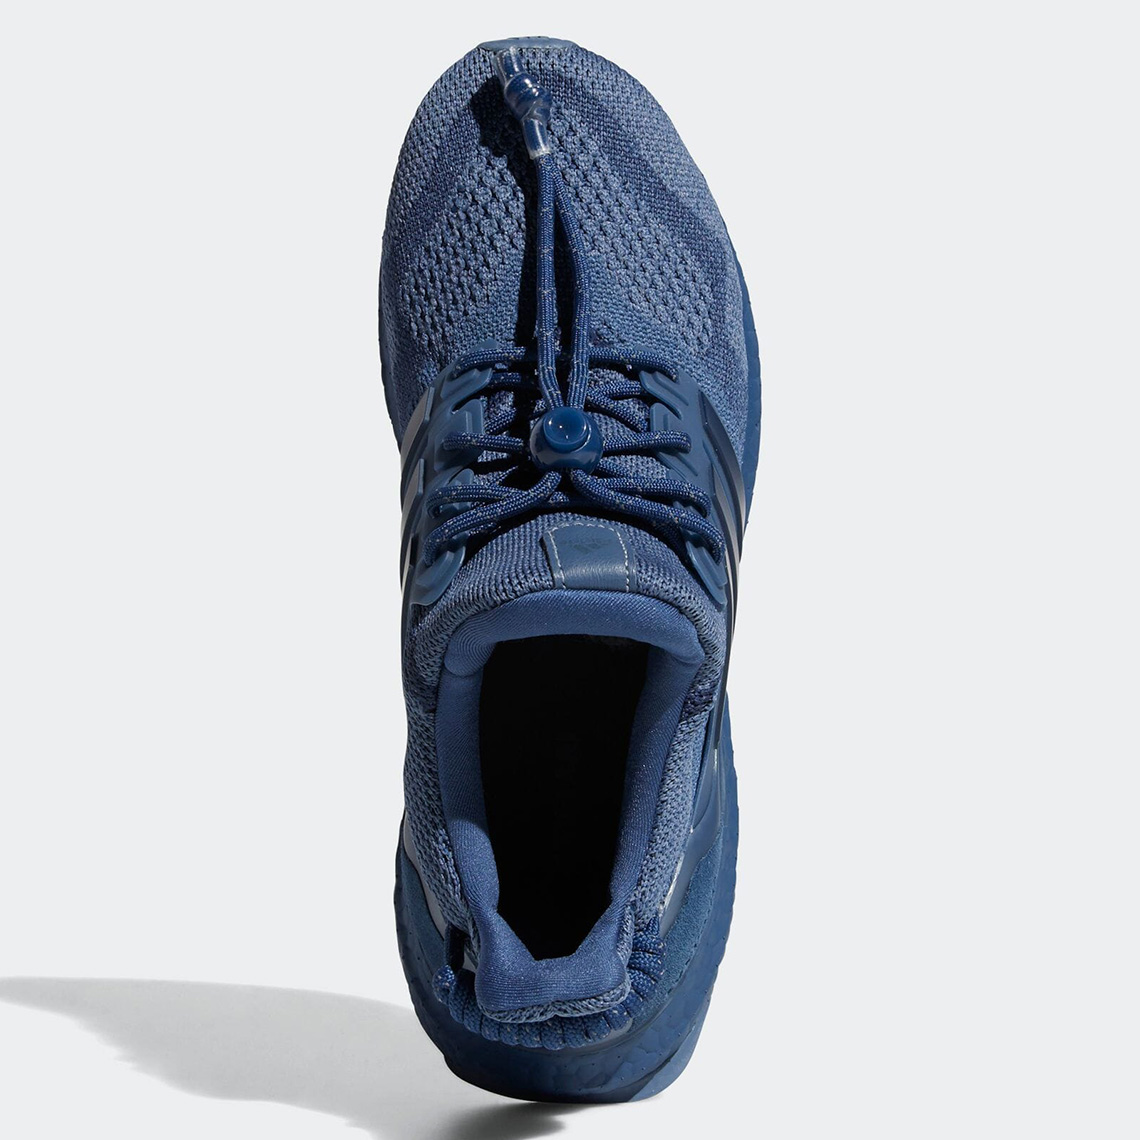 ability Planting trees See insects adidas IVY PARK UltraBOOST OG GW8682 Navy | SneakerNews.com